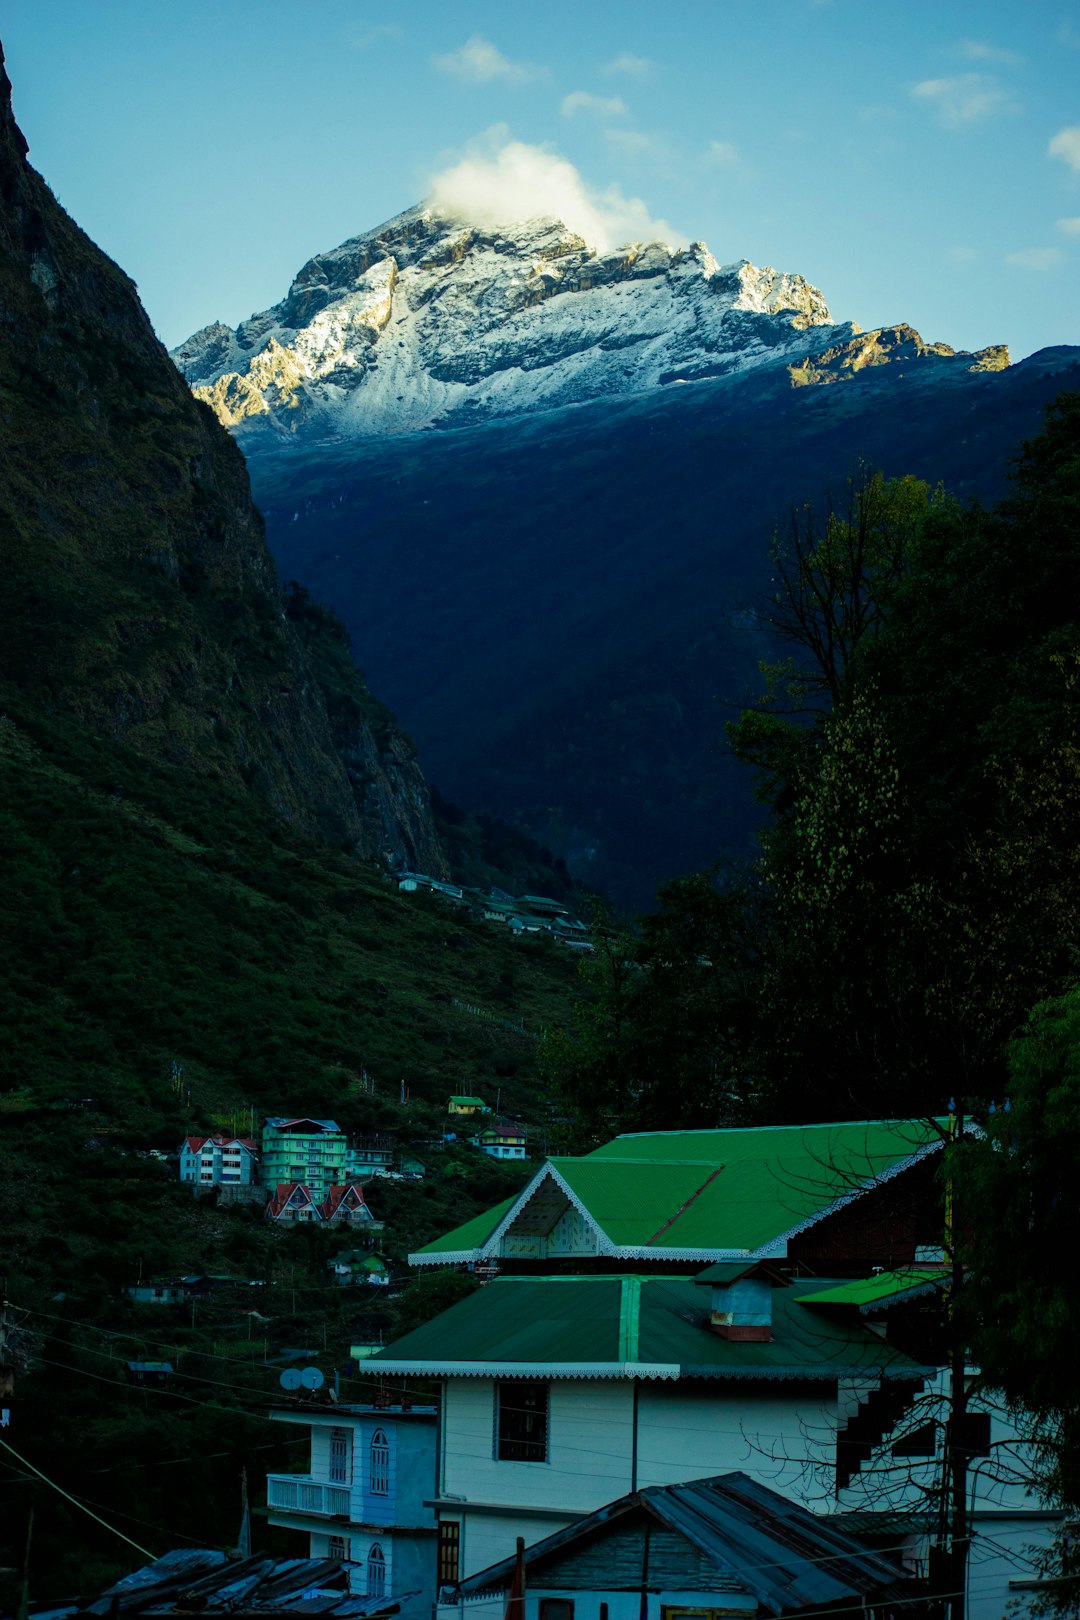 Hill station photo spot Lachung West Bengal